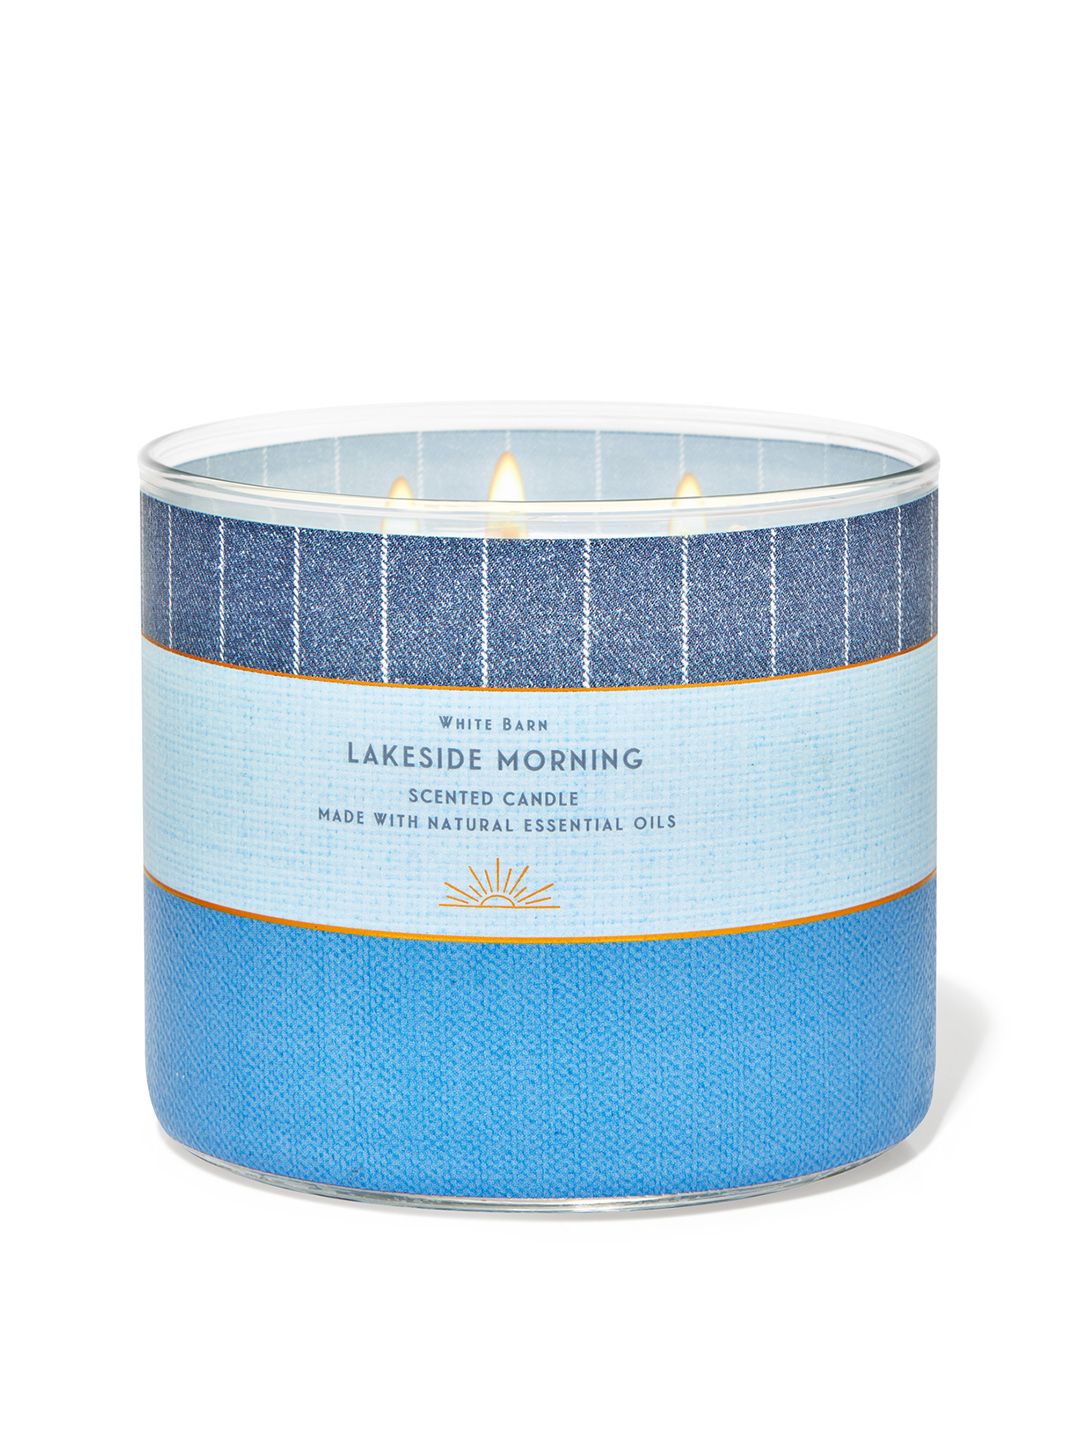 Bath & Body Works Lakeside Morning 3-Wick Scented Candle with Essential Oils - 411g Price in India